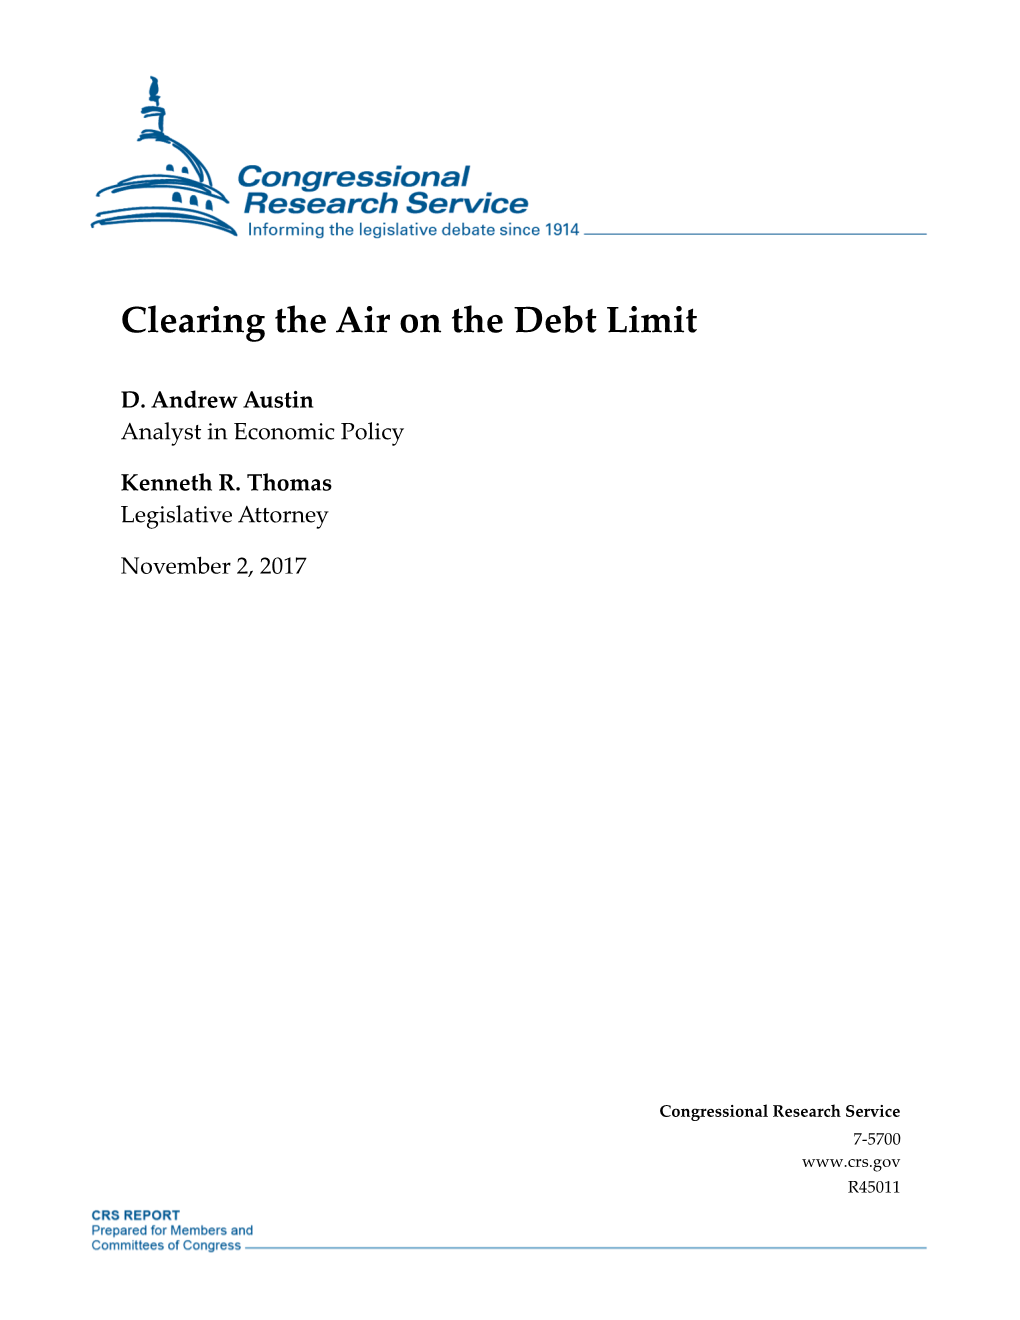 Clearing the Air on the Debt Limit